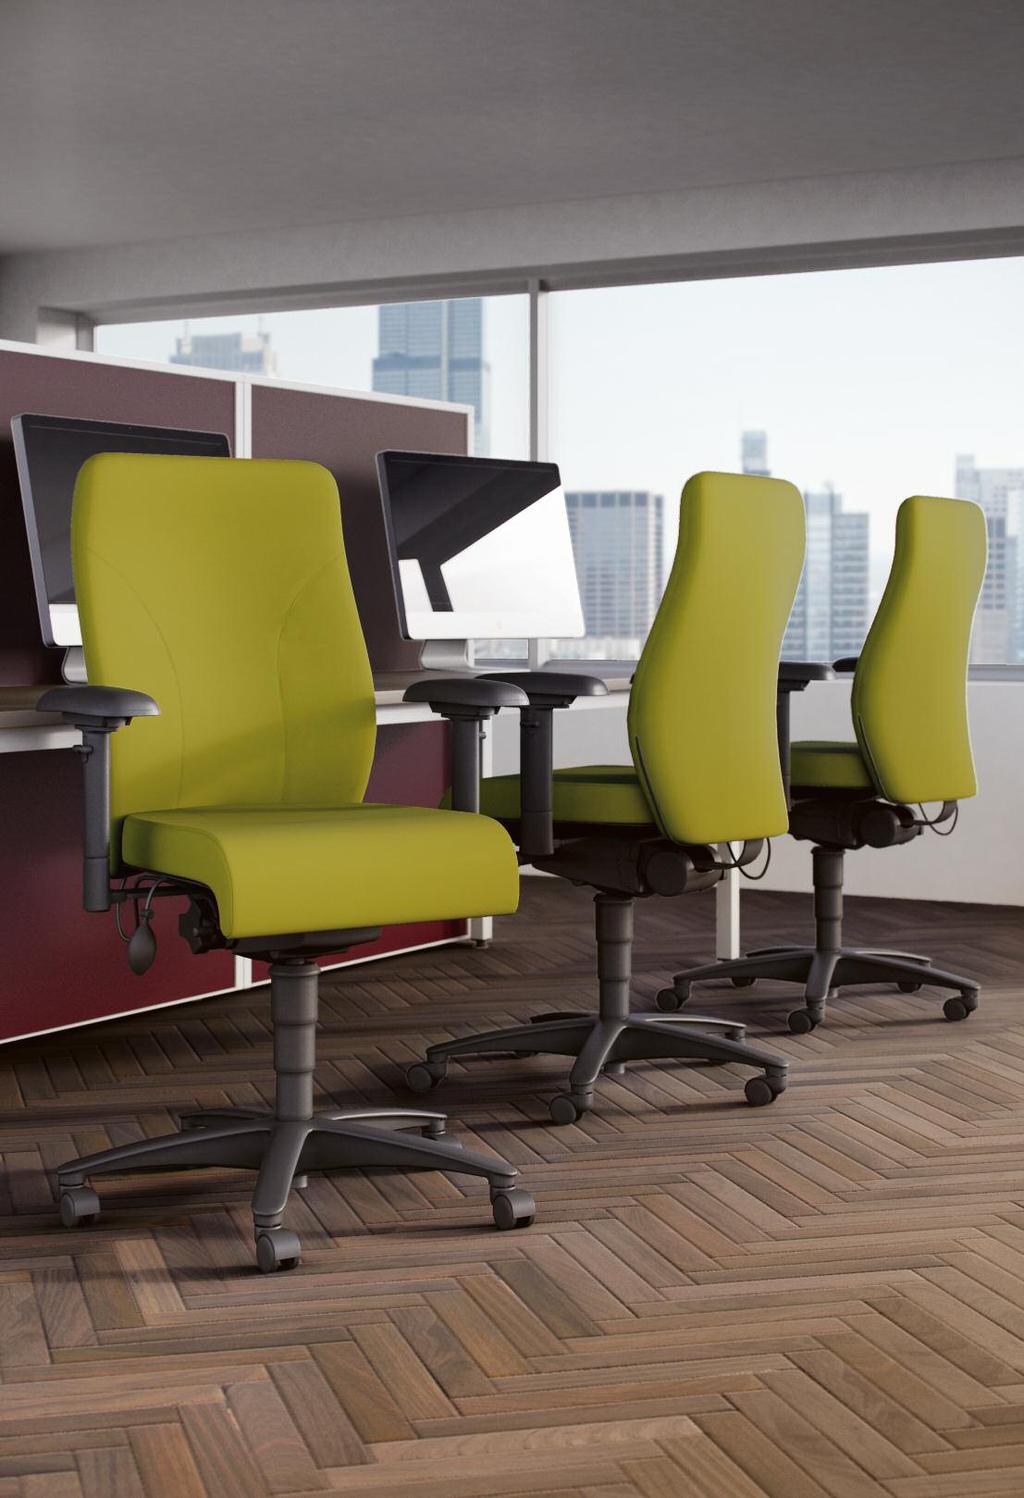 ethos A highly specified chair, ethos is designed to provide